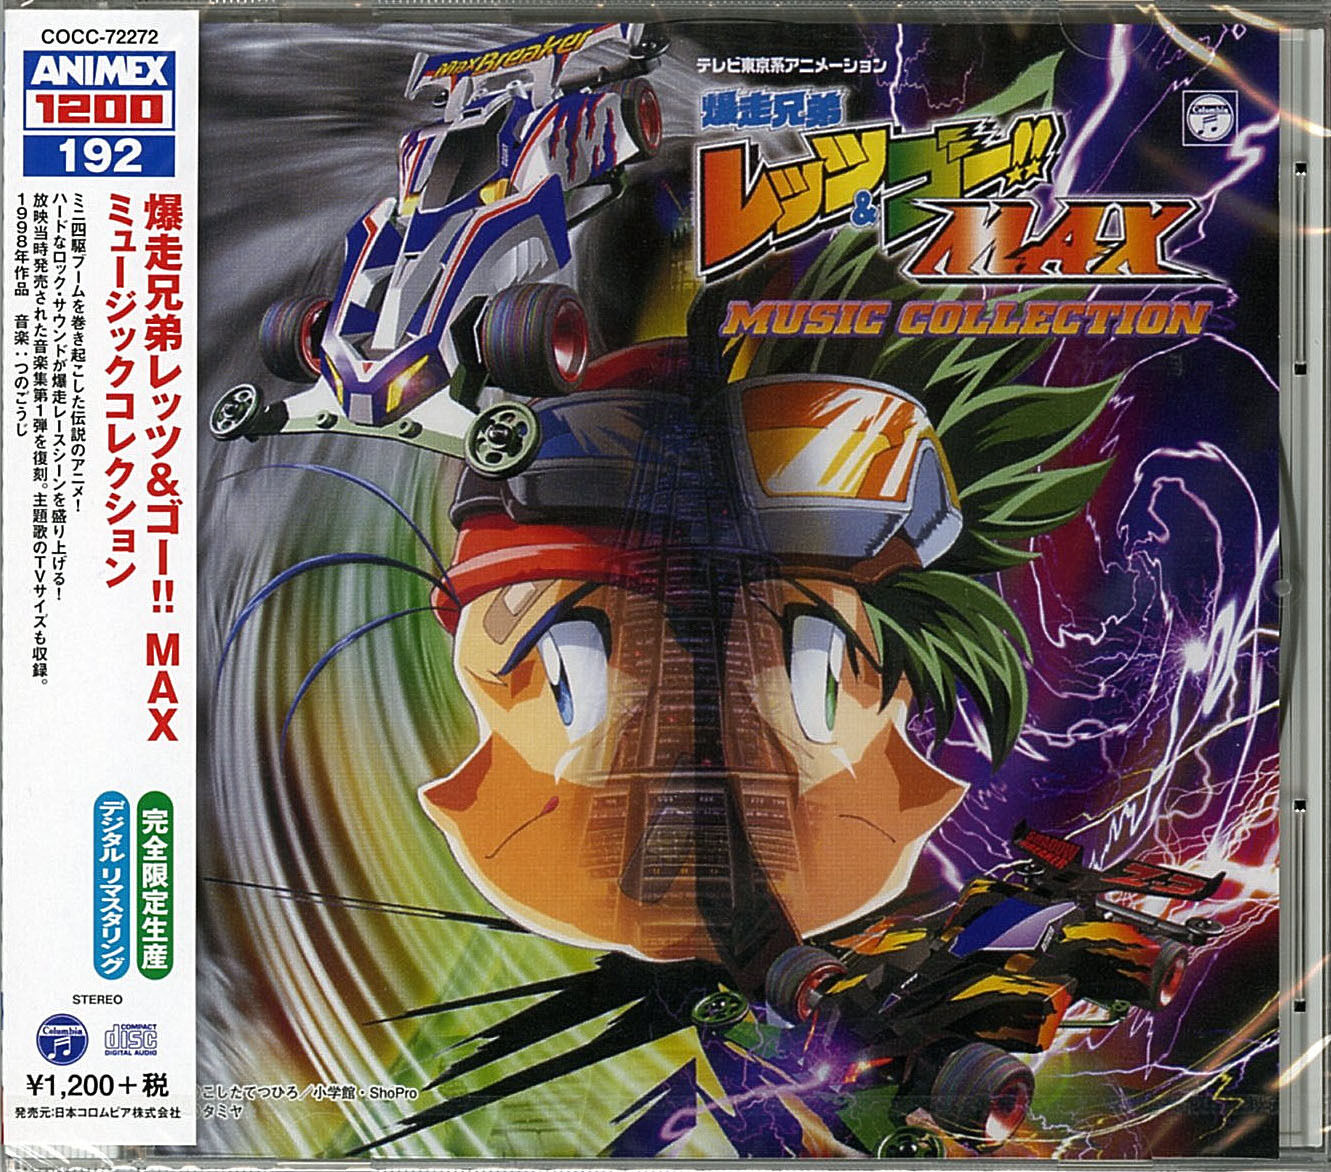 Bakusou Kyoudai Lets And Go Max Music Collection Japan Anime Soundtrack Cd For Sale Online Ebay